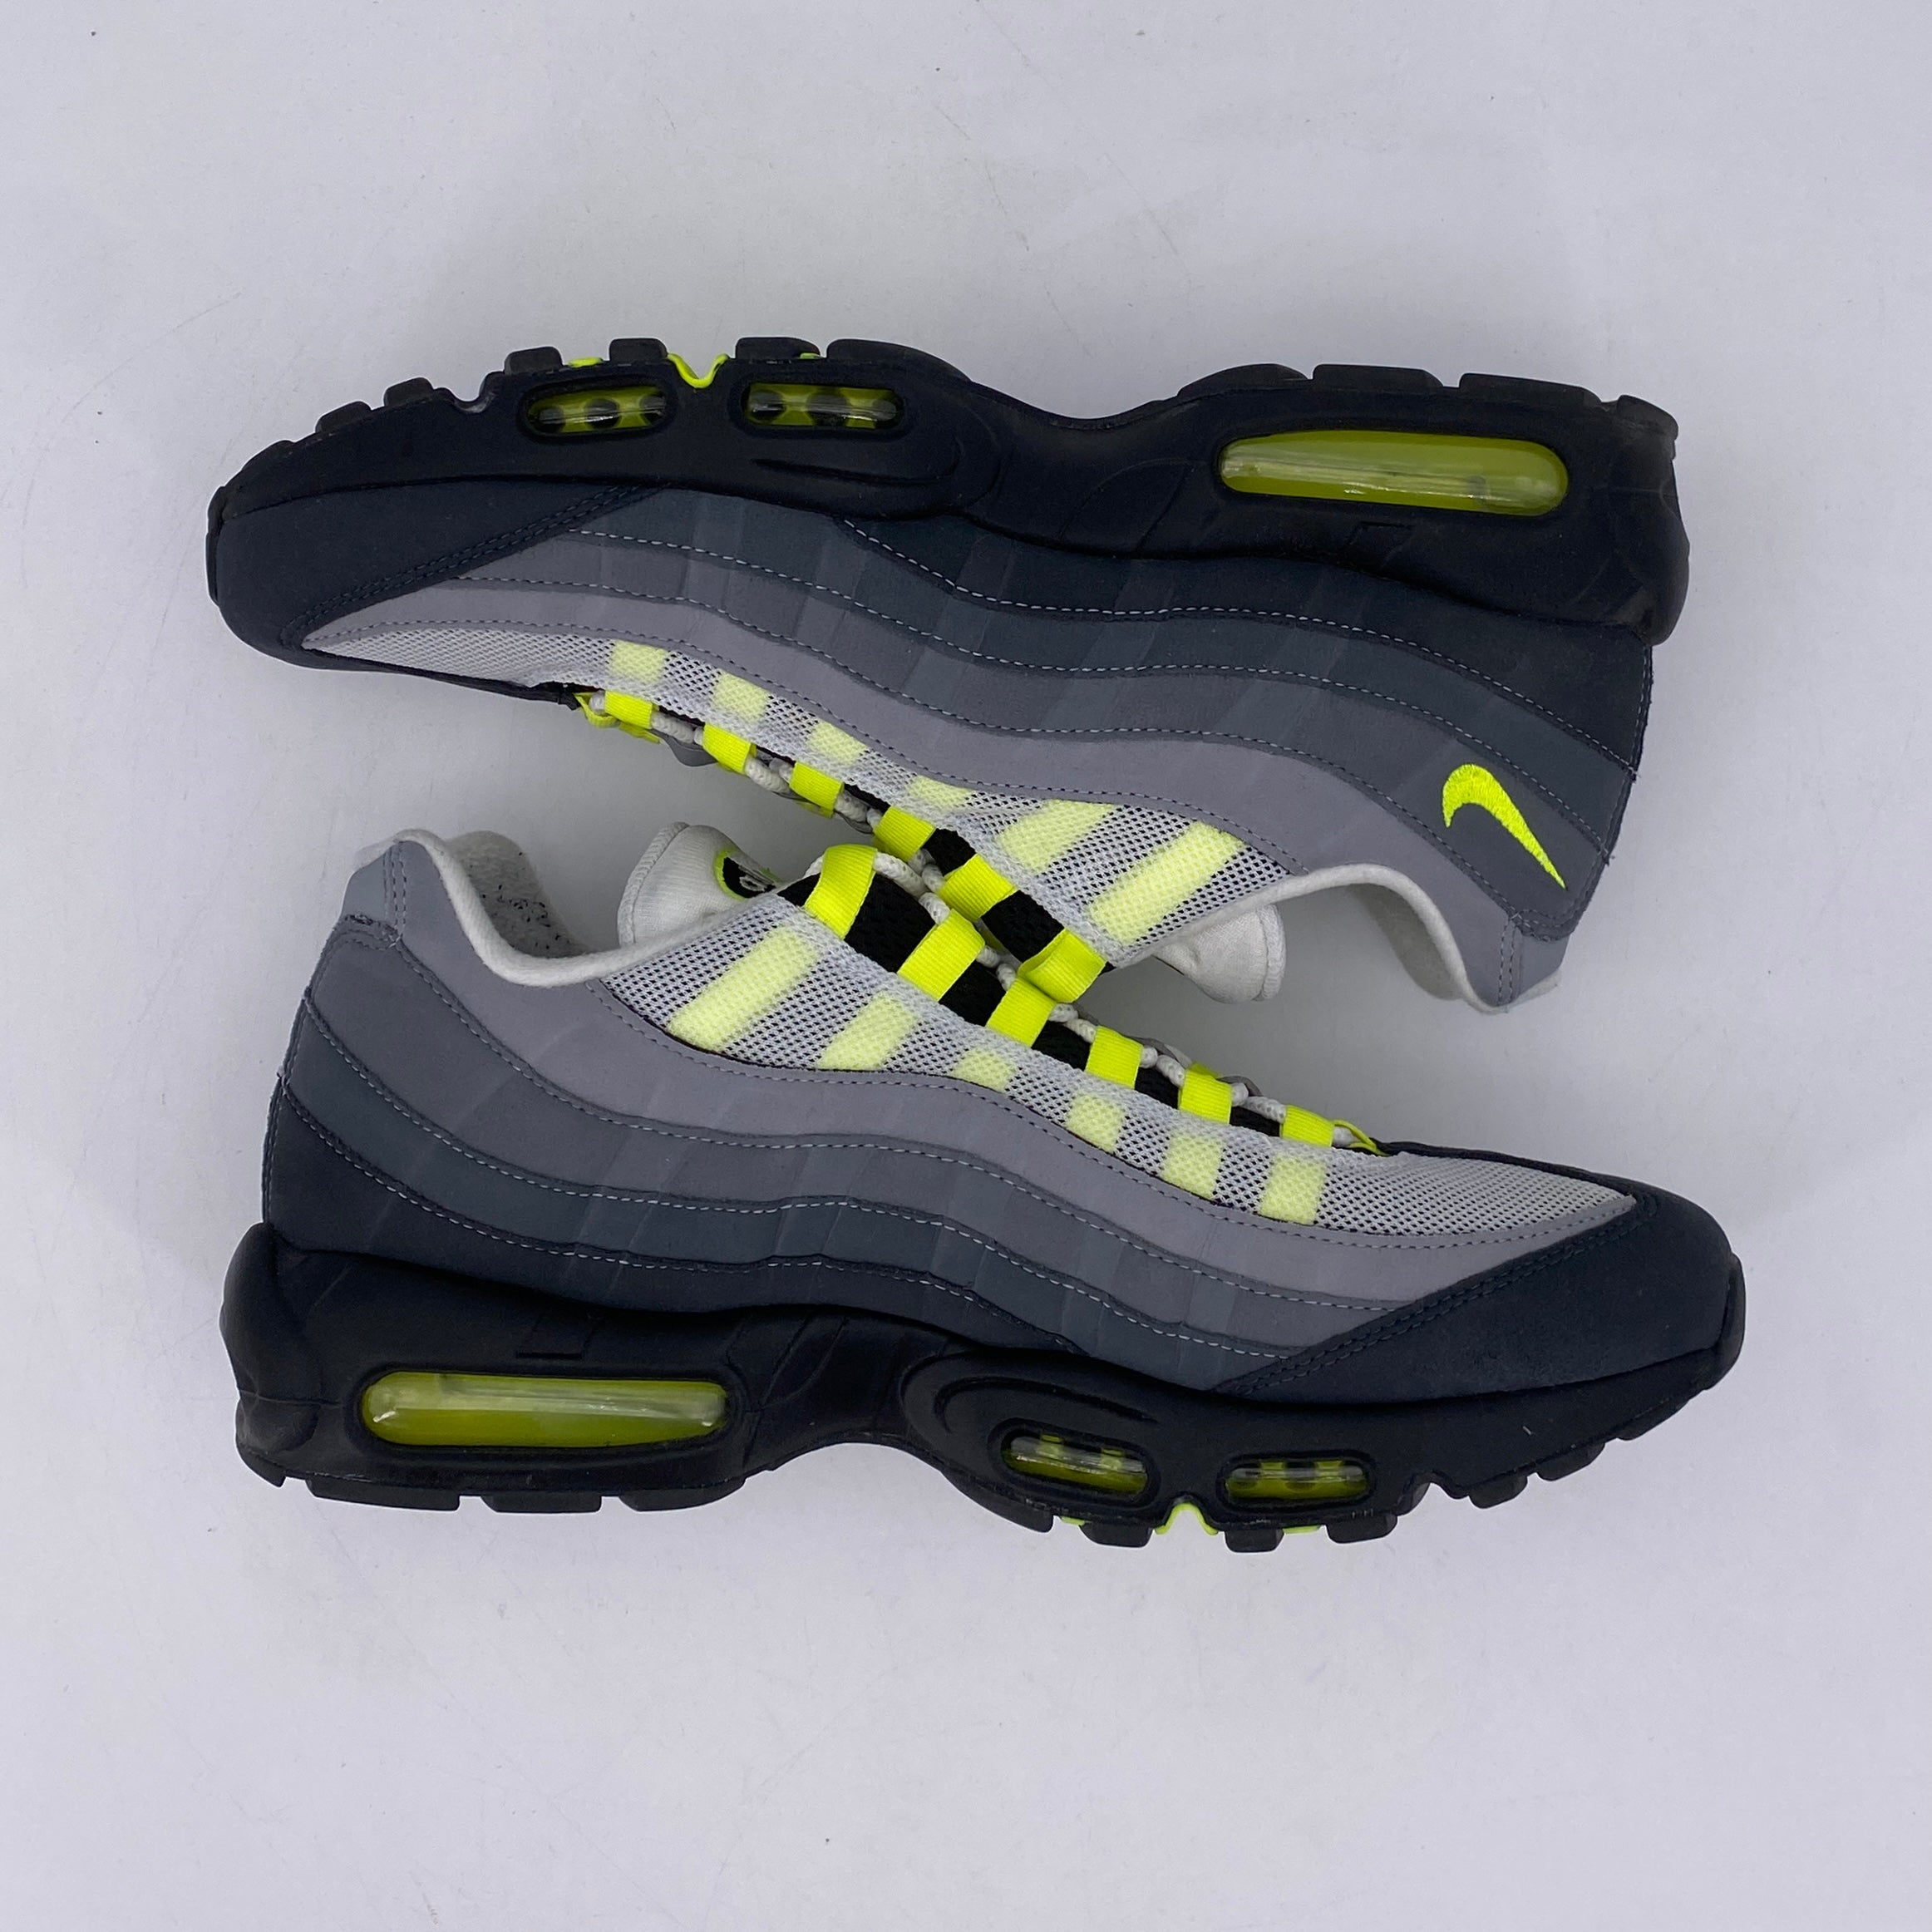 Nike Air Max 95 &quot;Neon&quot; 2020 Used Size 12